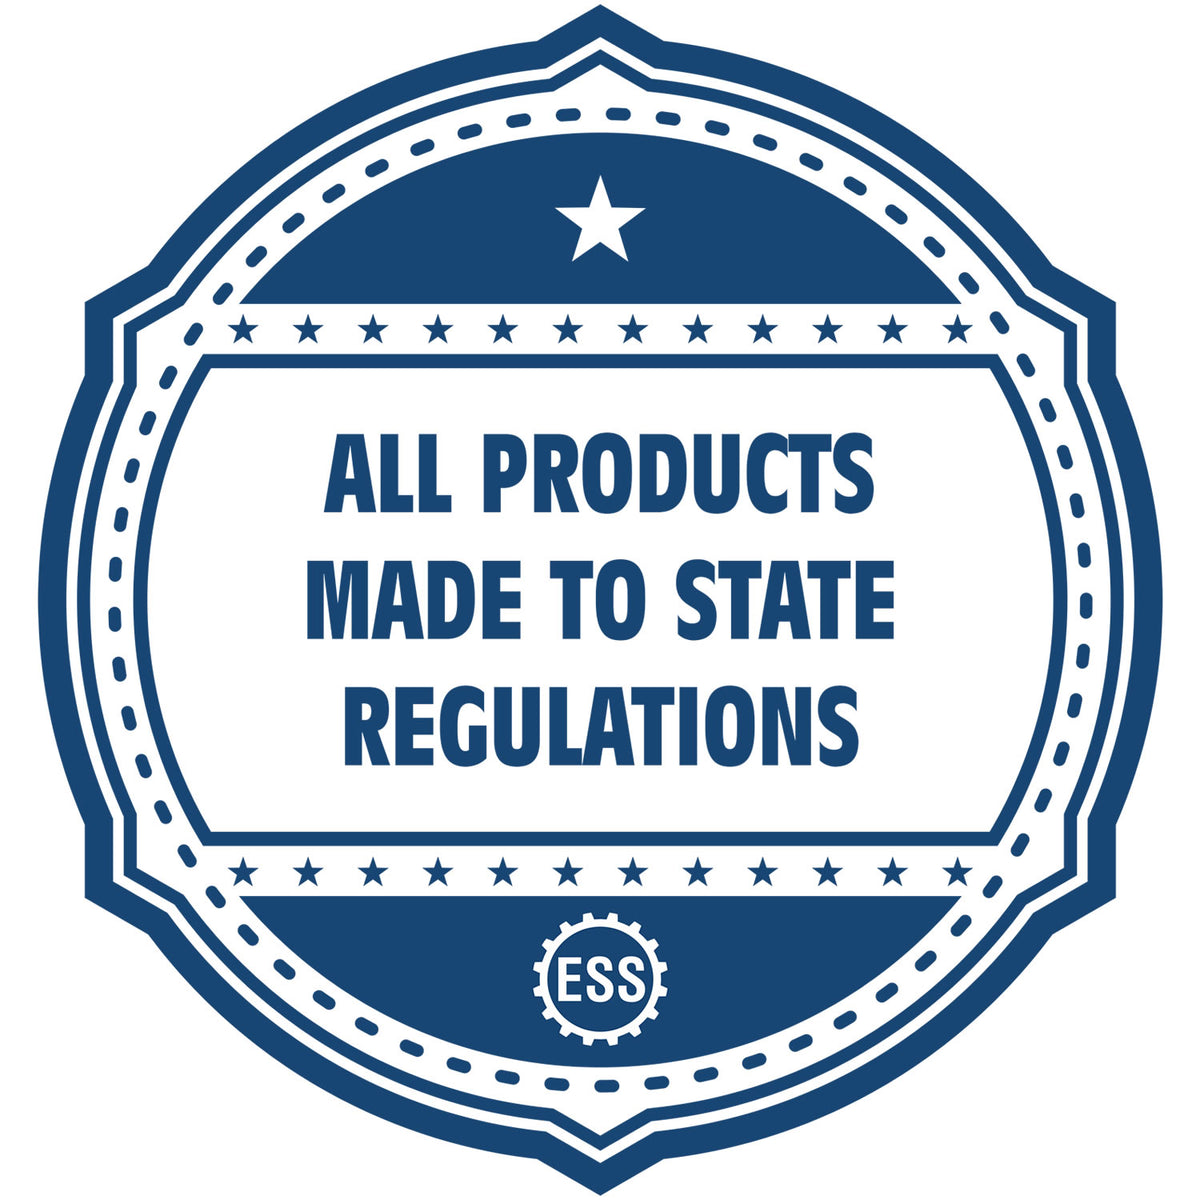 An icon or badge element for the Premium MaxLight Pre-Inked Kentucky Landscape Architectural Stamp showing that this product is made in compliance with state regulations.